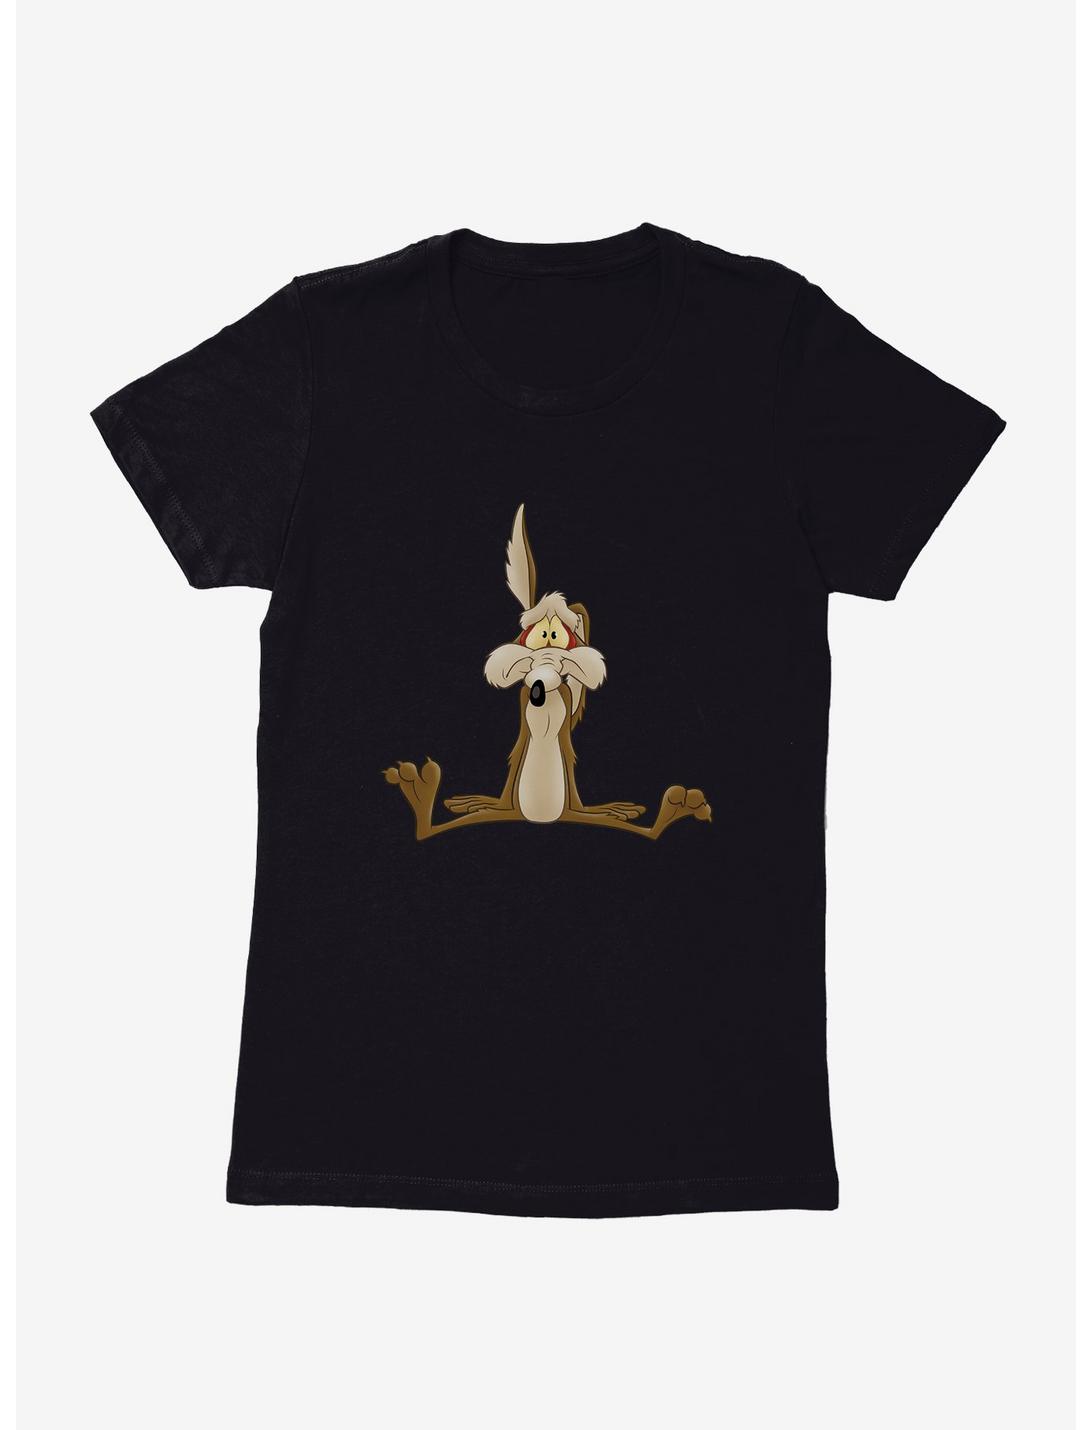 Looney Tunes Wile E. Coyote Womens T-Shirt, BLACK, hi-res